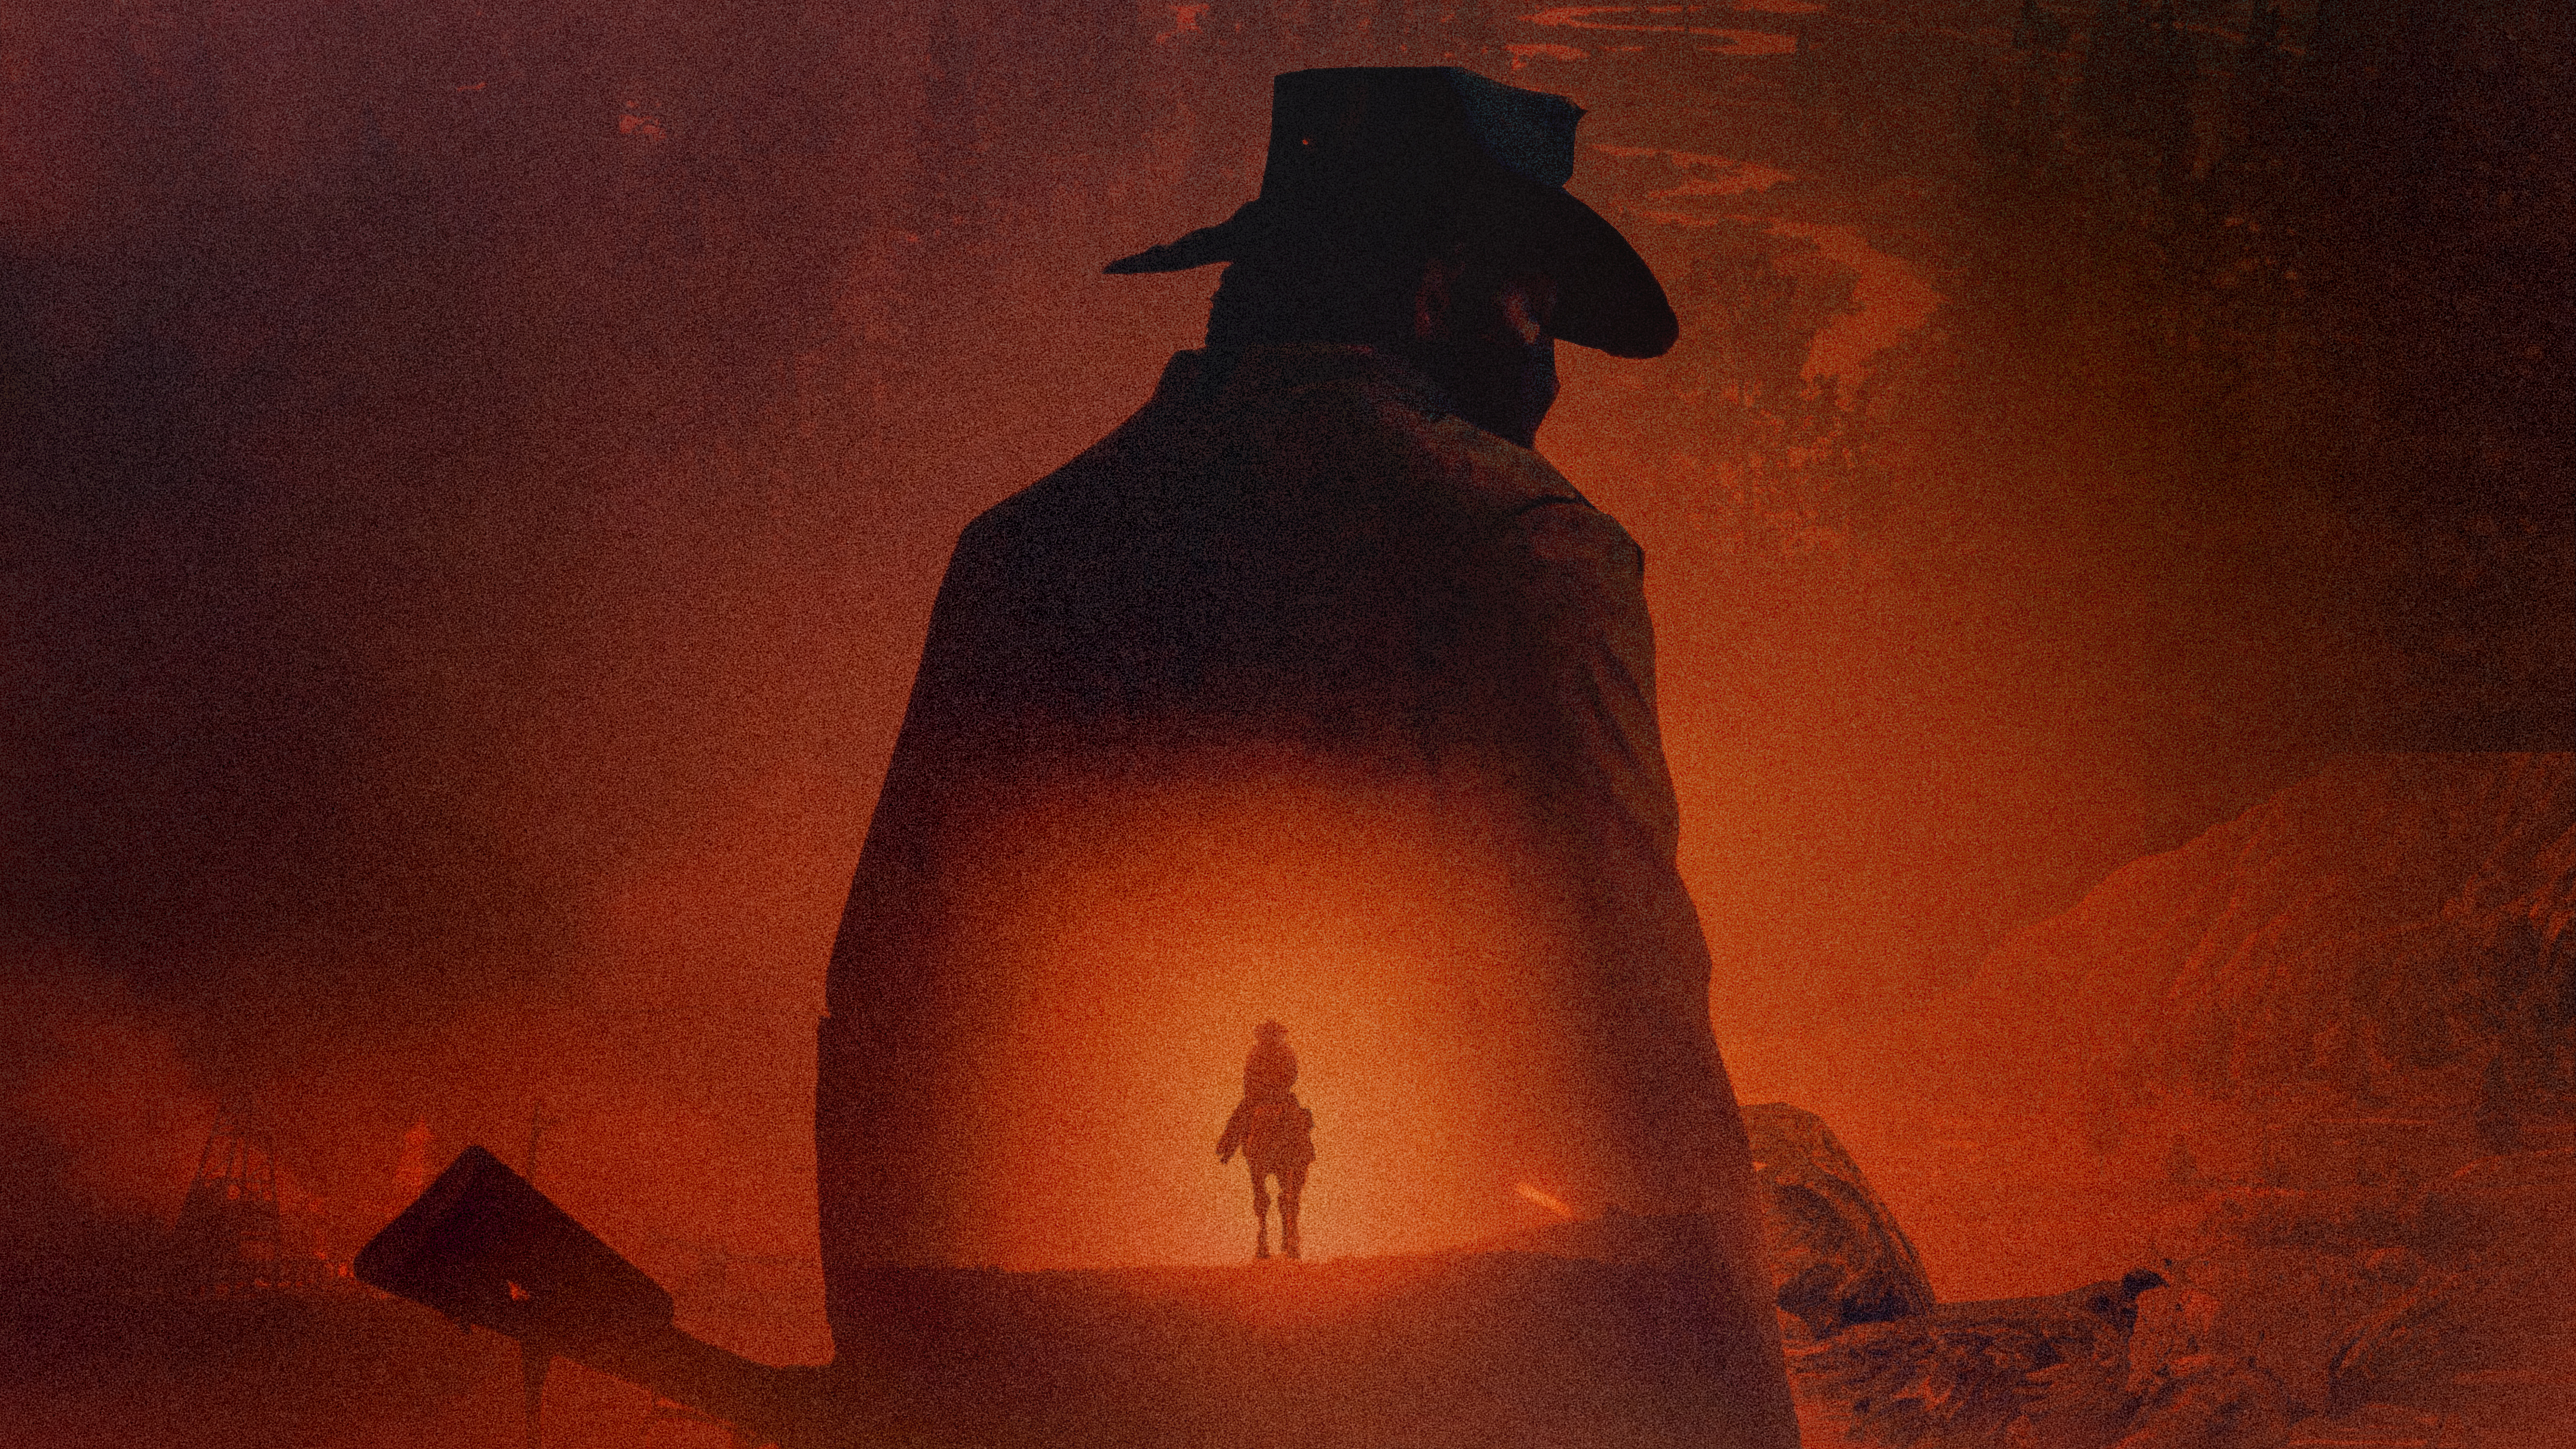 Red Dead Redemption 2 Poster Key Art 2018, HD Games, 4k Wallpapers